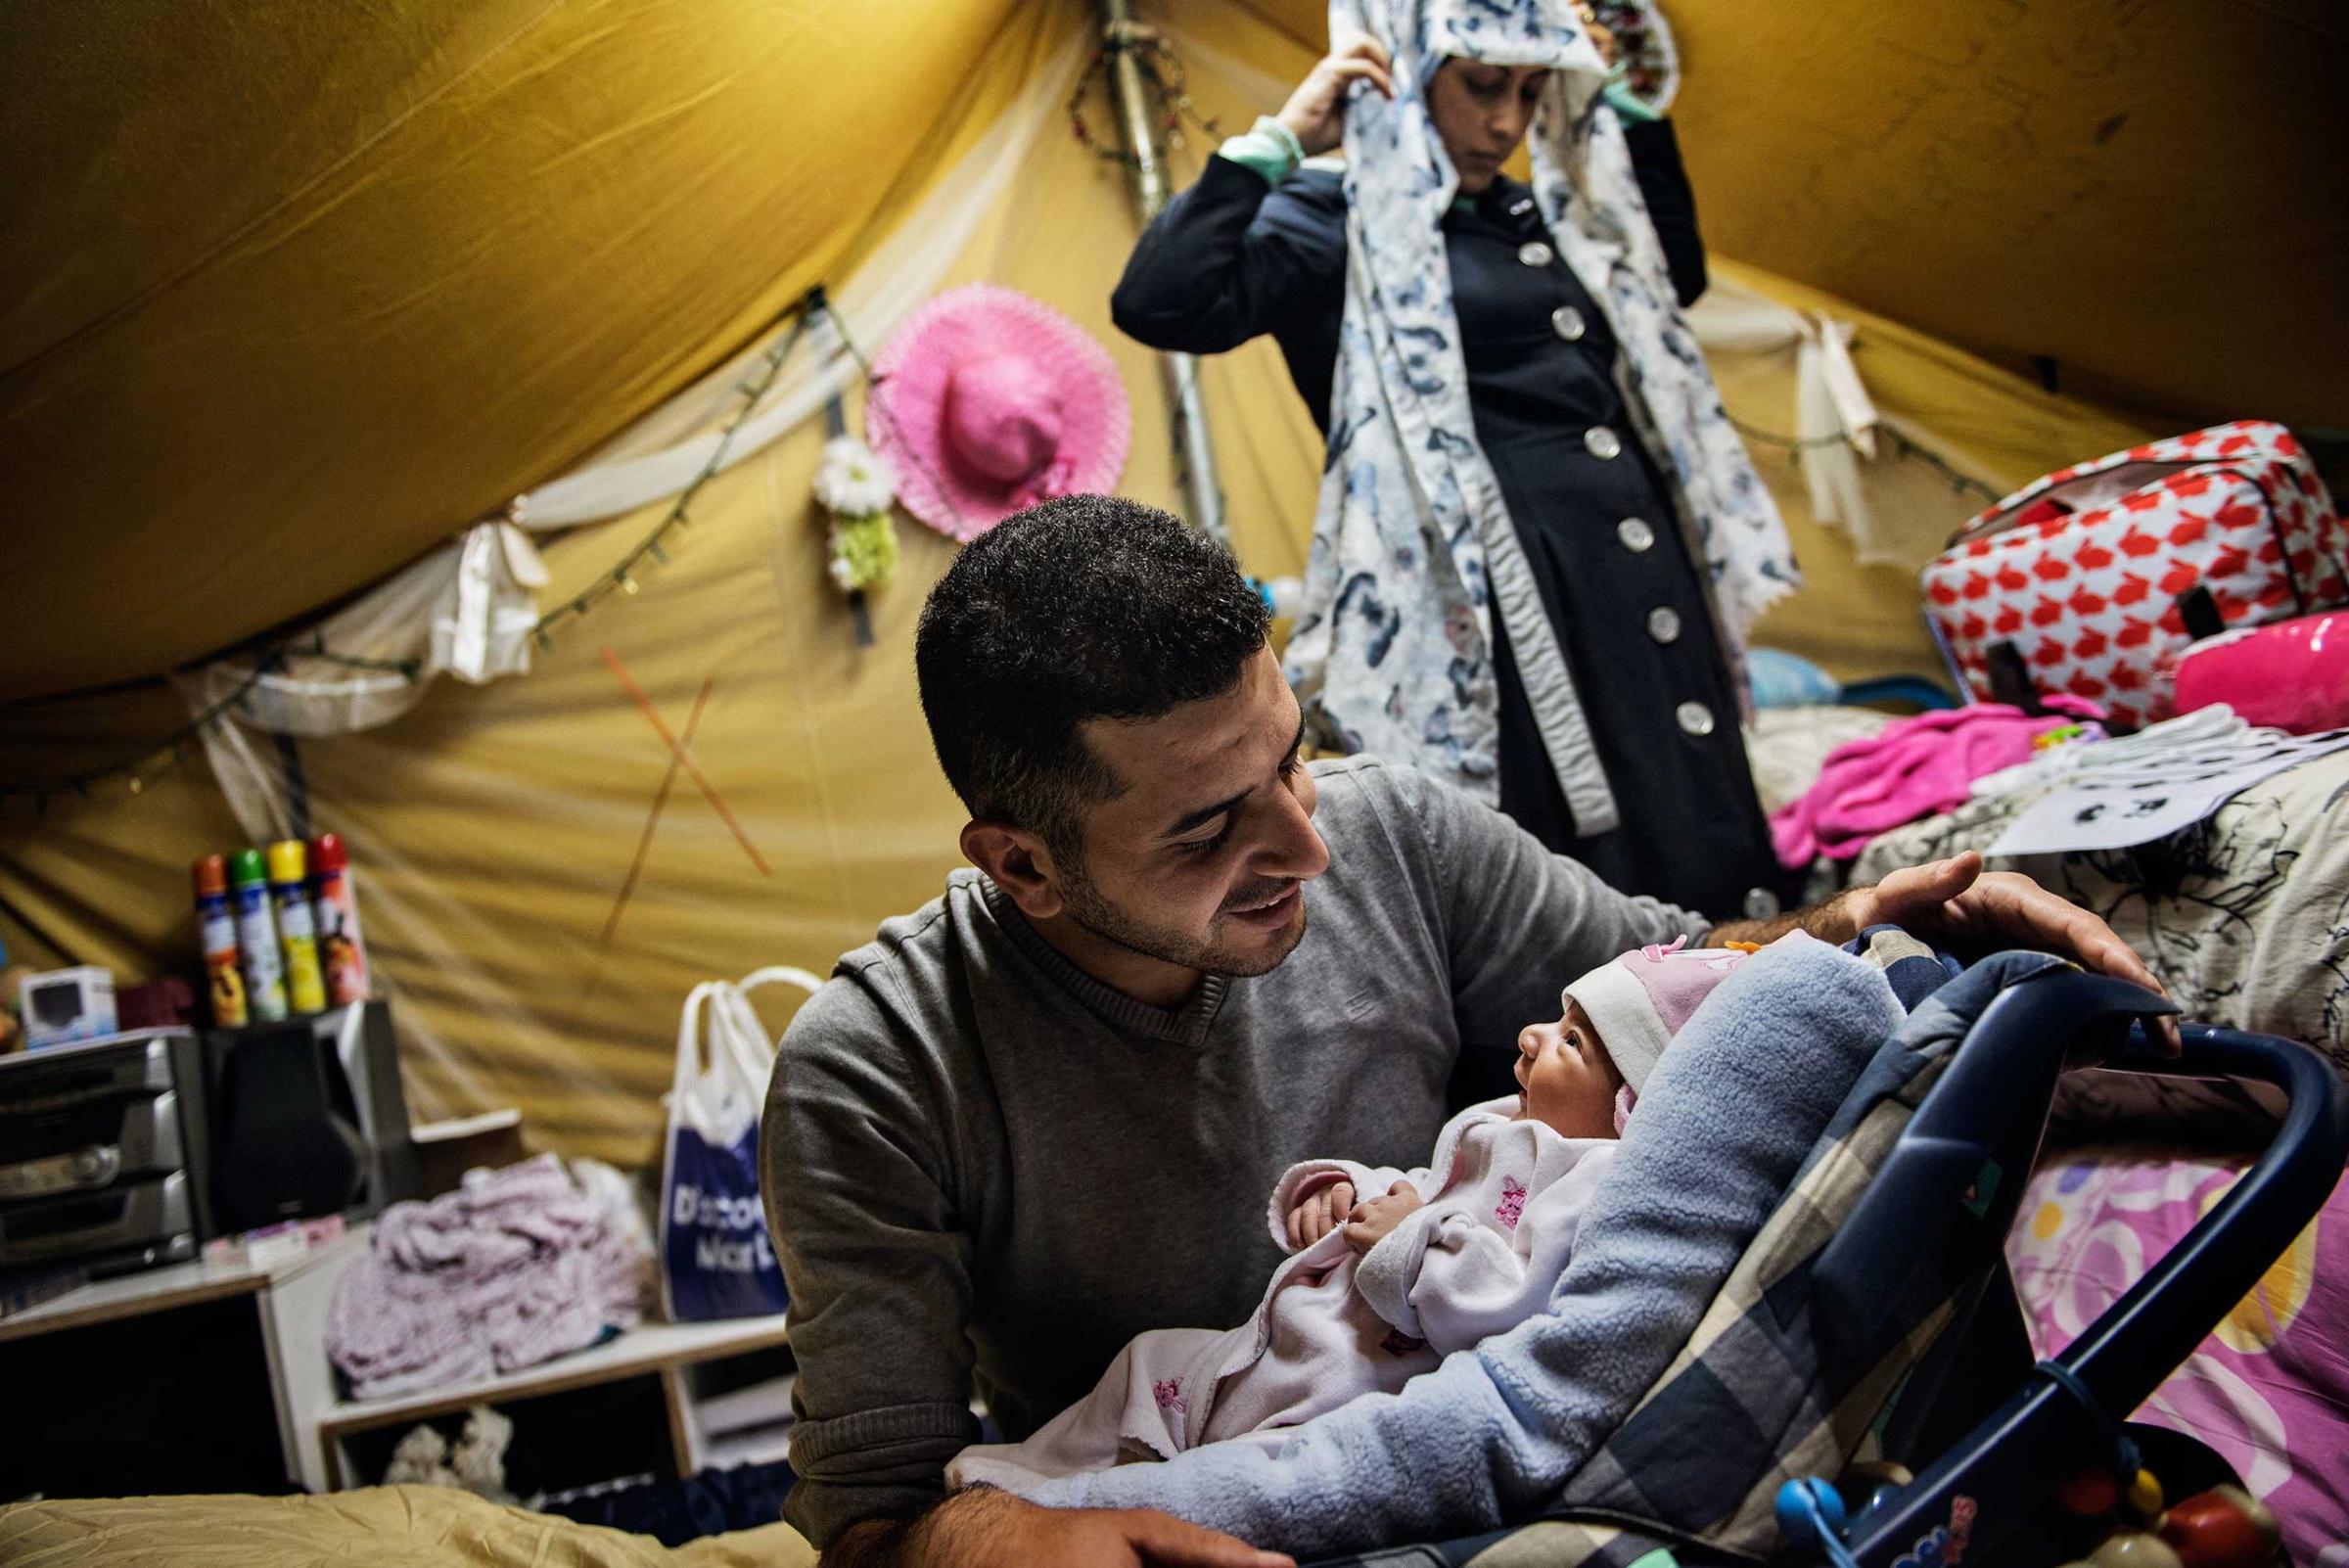 Yousef Alarsan holds his newborn baby daughter Rahaf, while his wife Nourelhuda, stands behind them in their tent in the Oreokastro camp, Nov. 8, 2016. The 22-year-old first time mother was terrified of giving birth alone in a foreign country. When she was still in the early stages of her pregnancy, she and her husband crossed the Syrian border into Turkey by foot. They then hired a smuggler to make the crossing to Greece. Rahaf was born Nov. 1, 2016.